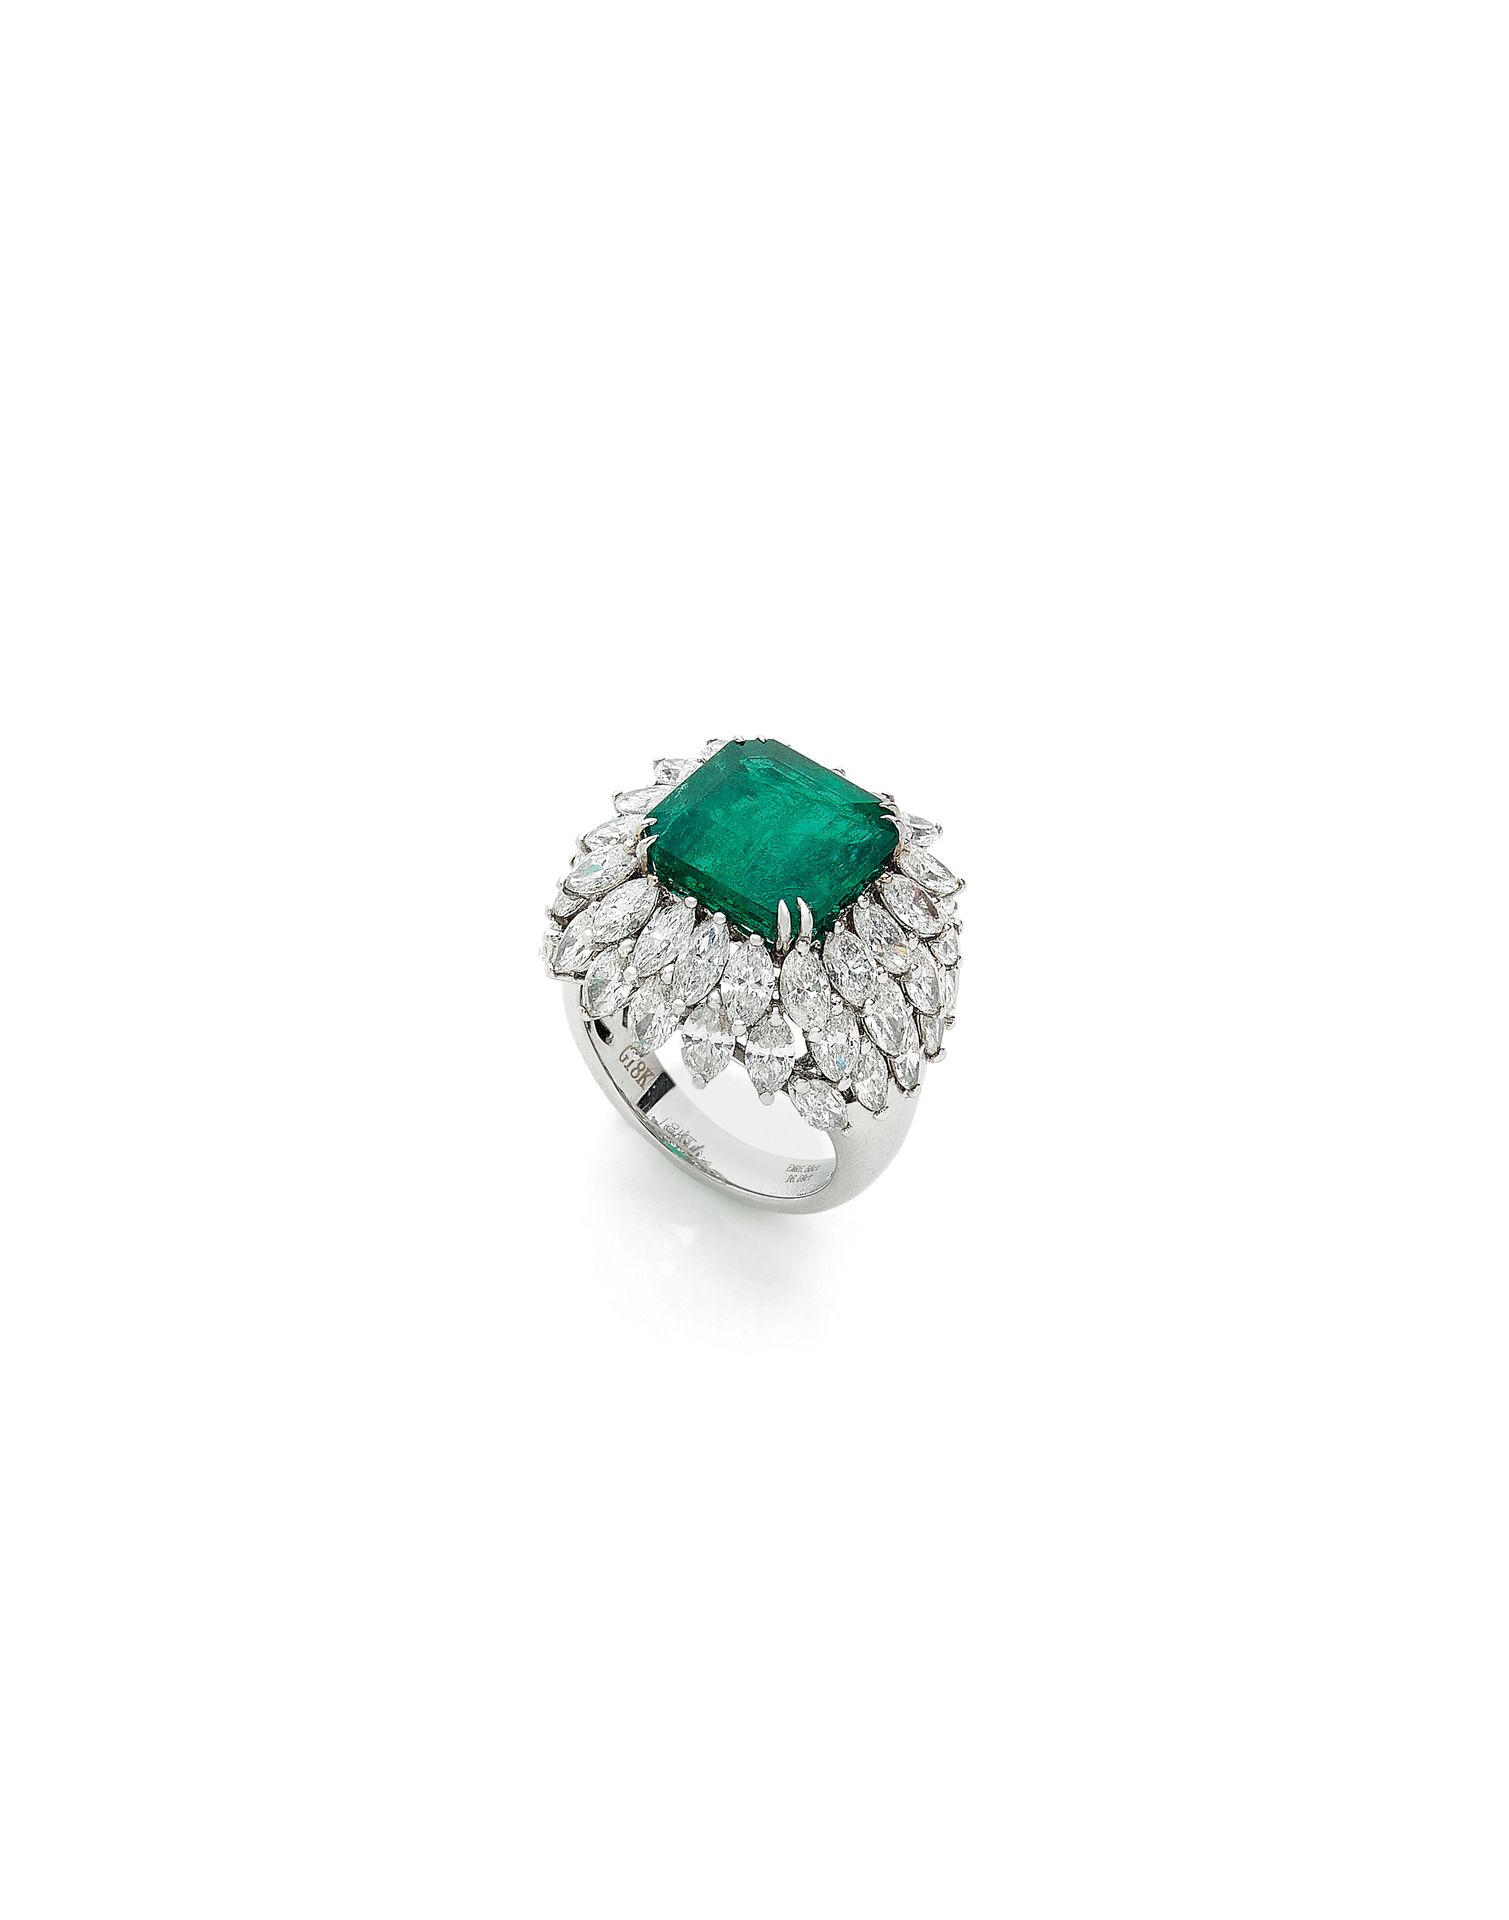 Null IMPORTANT RING

holding a square emerald of 6.58 carats in a surround of na&hellip;